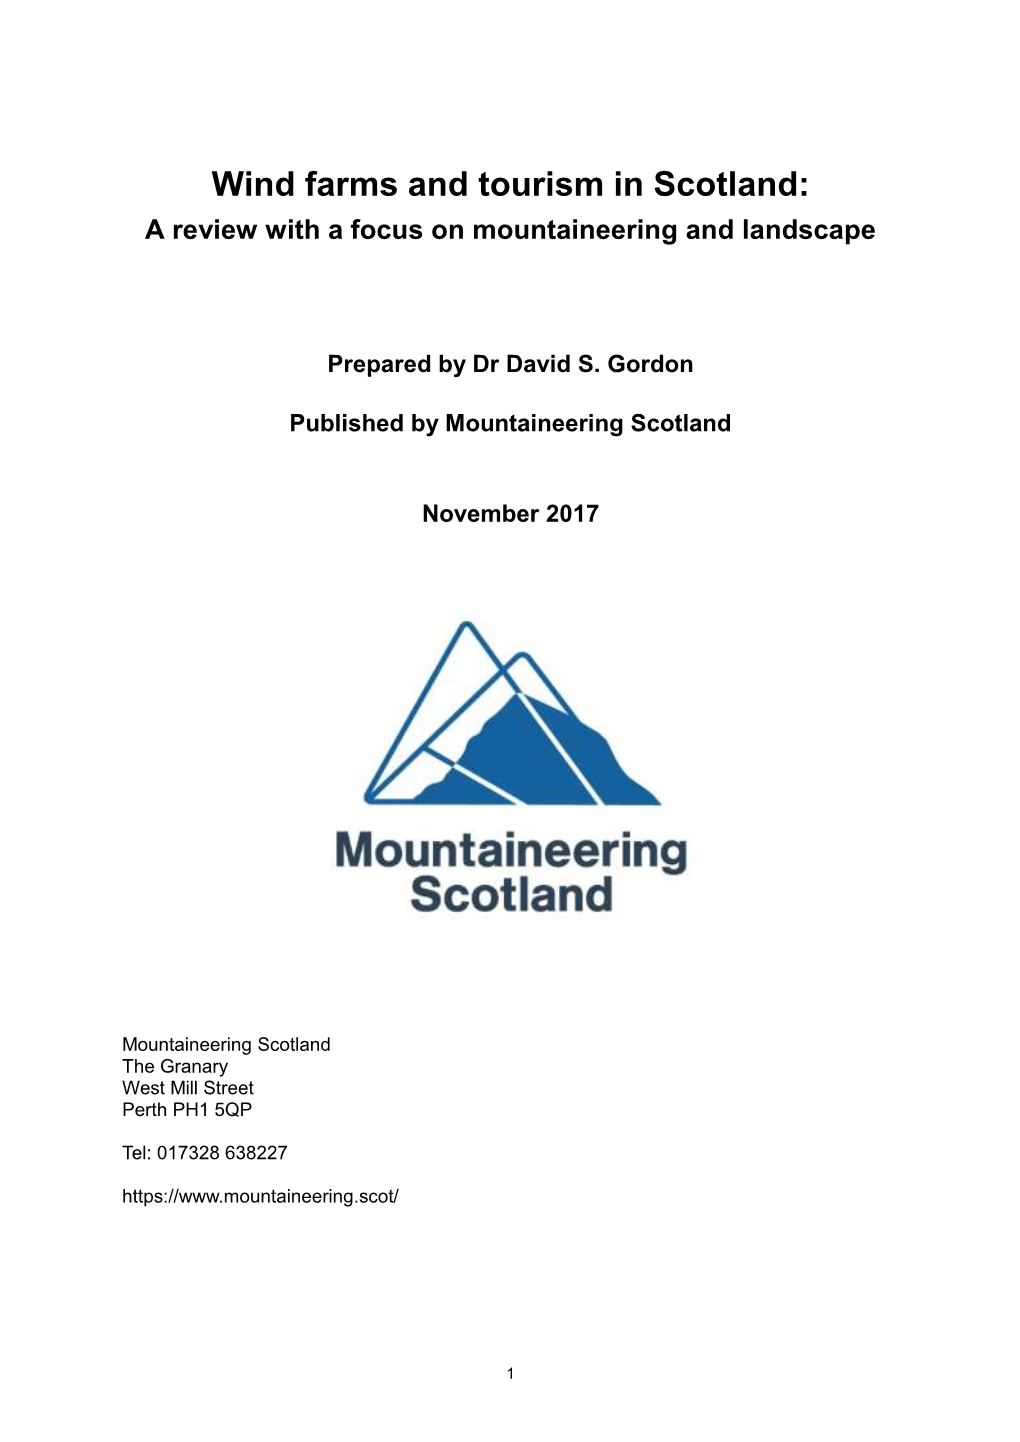 Wind Farms and Tourism in Scotland: a Review with a Focus on Mountaineering and Landscape